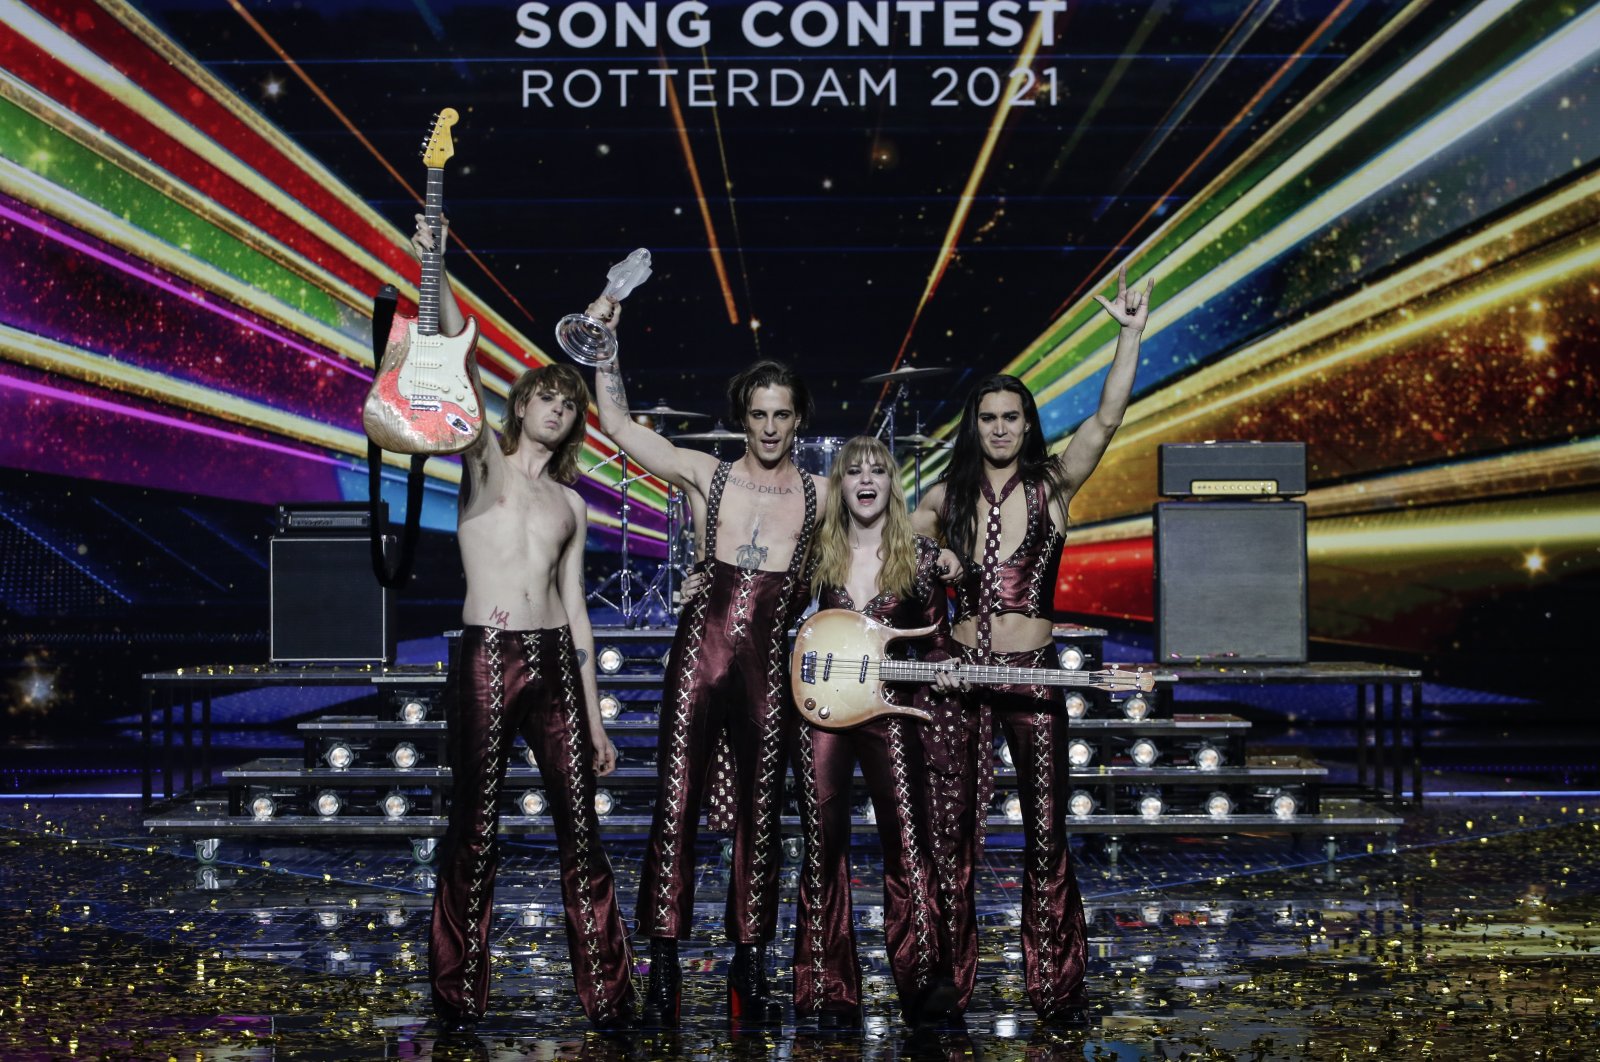 Italy's Maneskin celebrates with the trophy after winning the Grand Final of the Eurovision Song Contest at Ahoy arena in Rotterdam, Netherlands, May 22, 2021. (AP Photo)